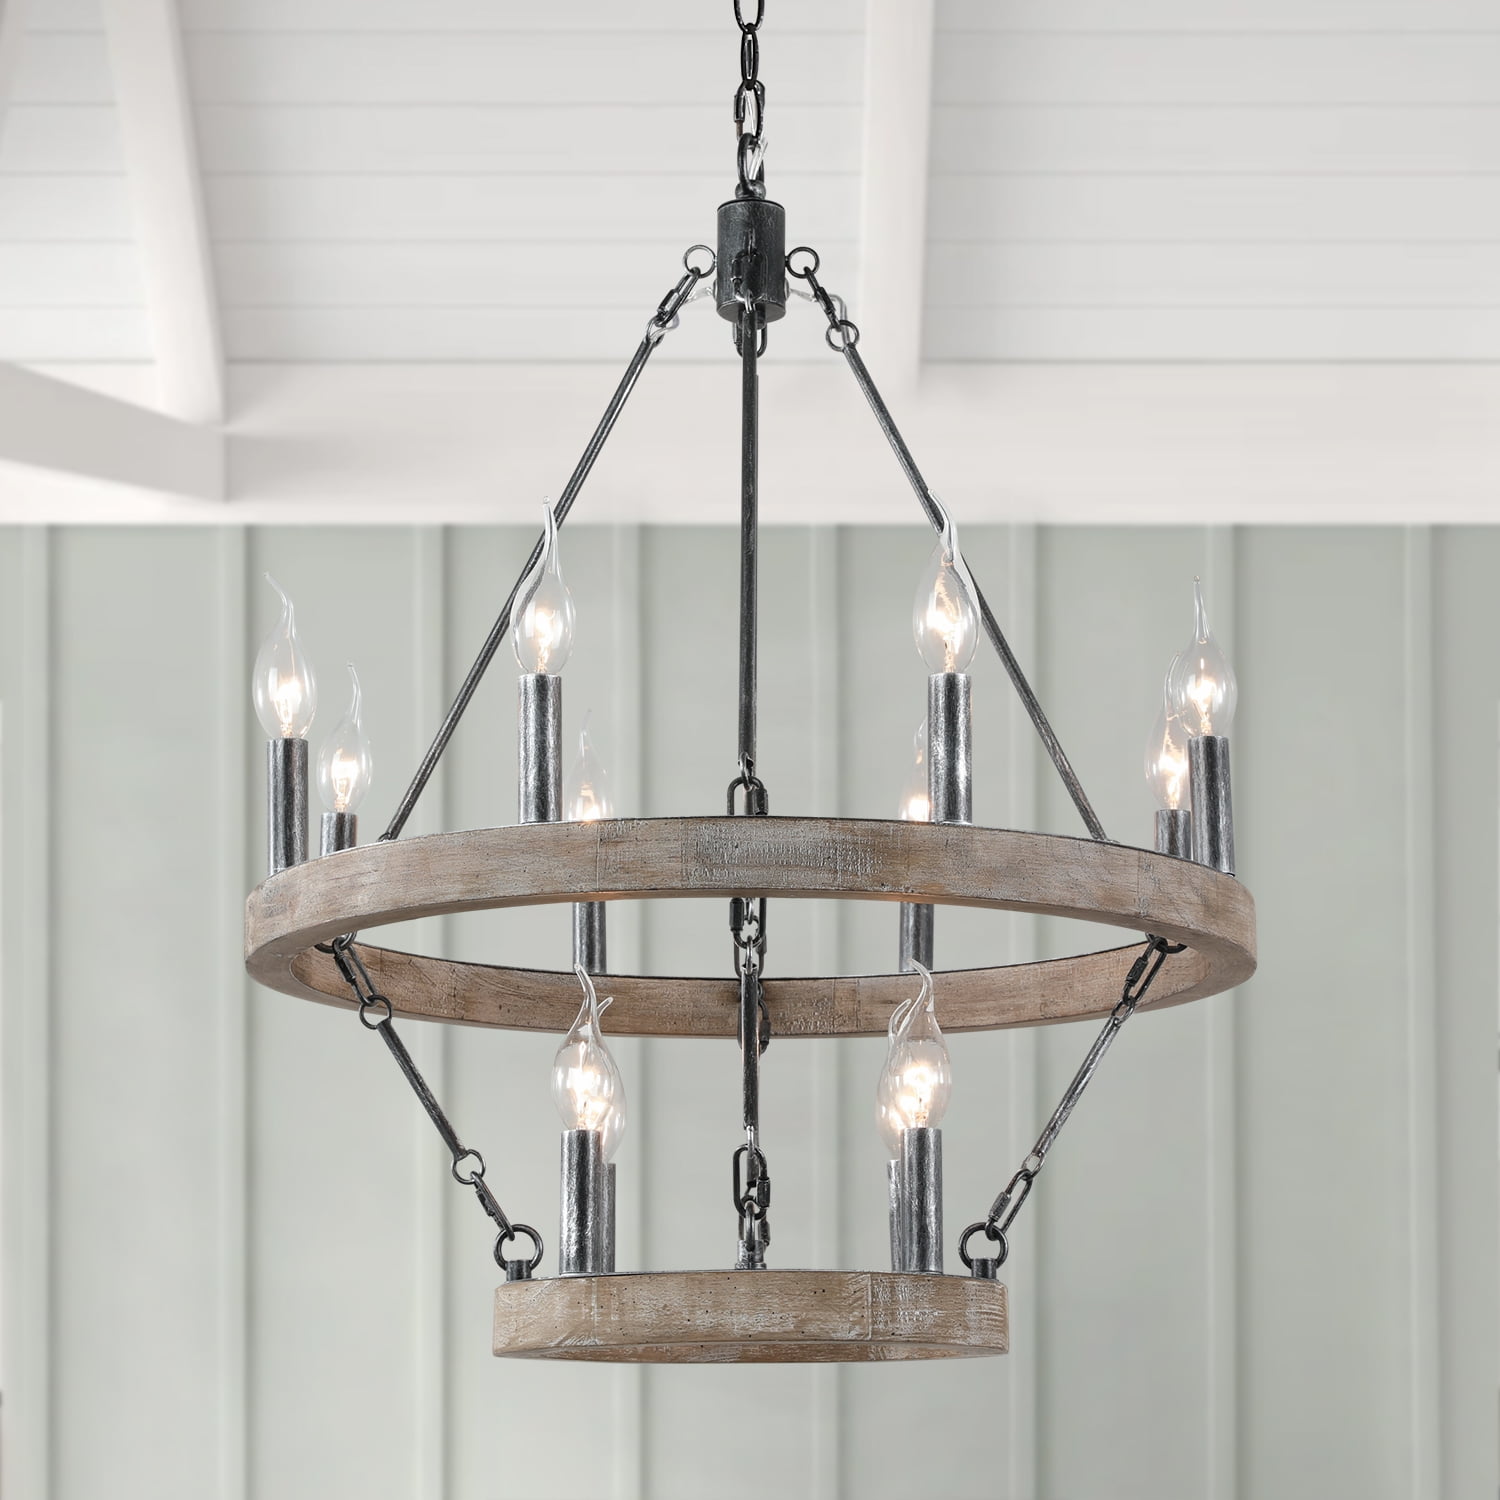 Kitchen Island Farmhouse Industrial Country Style Large Round Pendant Light Fixture for Dining Room Wellmet 12-Light Black Wagon Wheel Chandelier Diam 38 inch